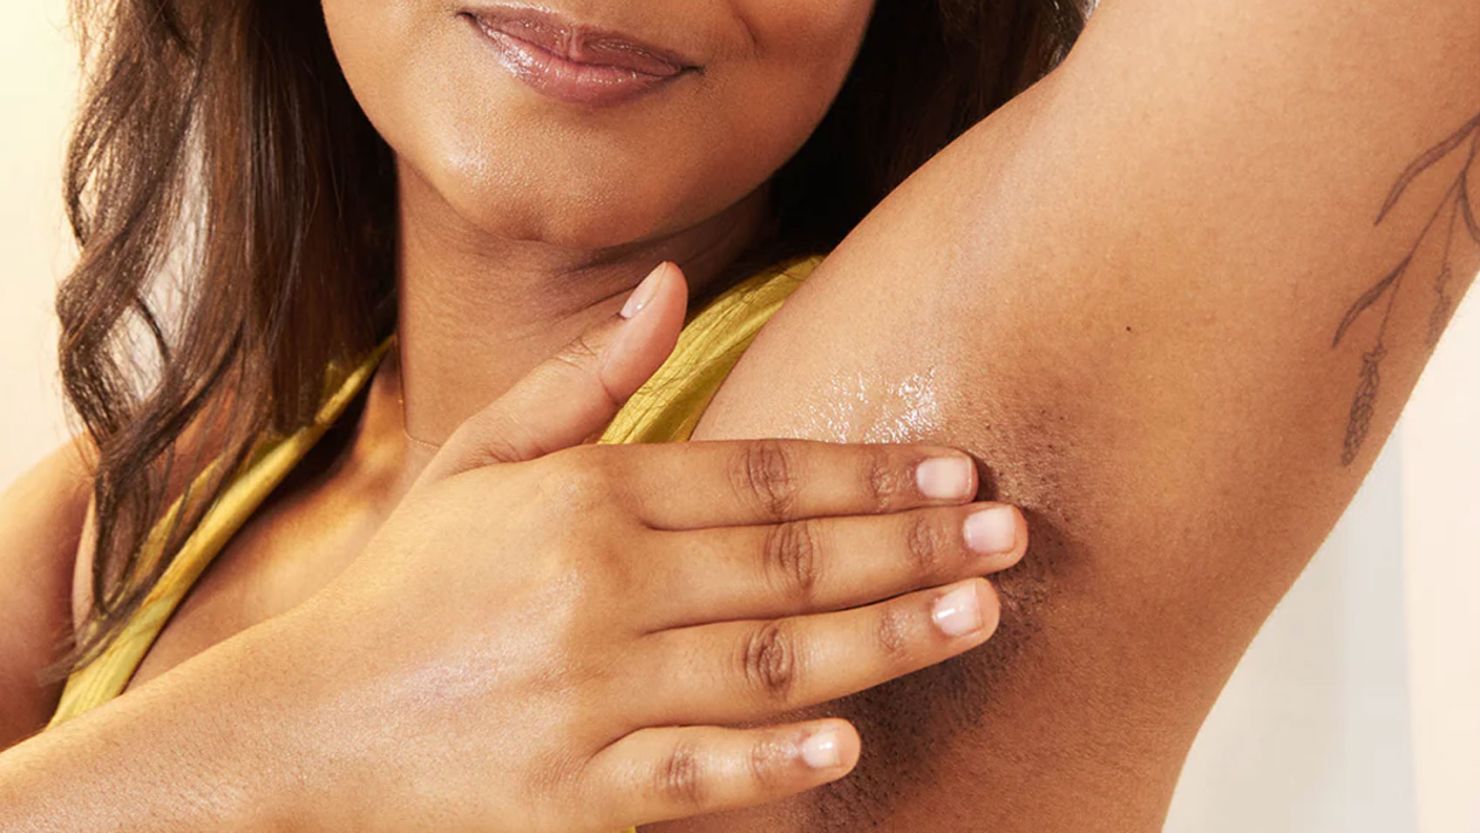 Learn how to get rid of razor bumps safely and fast